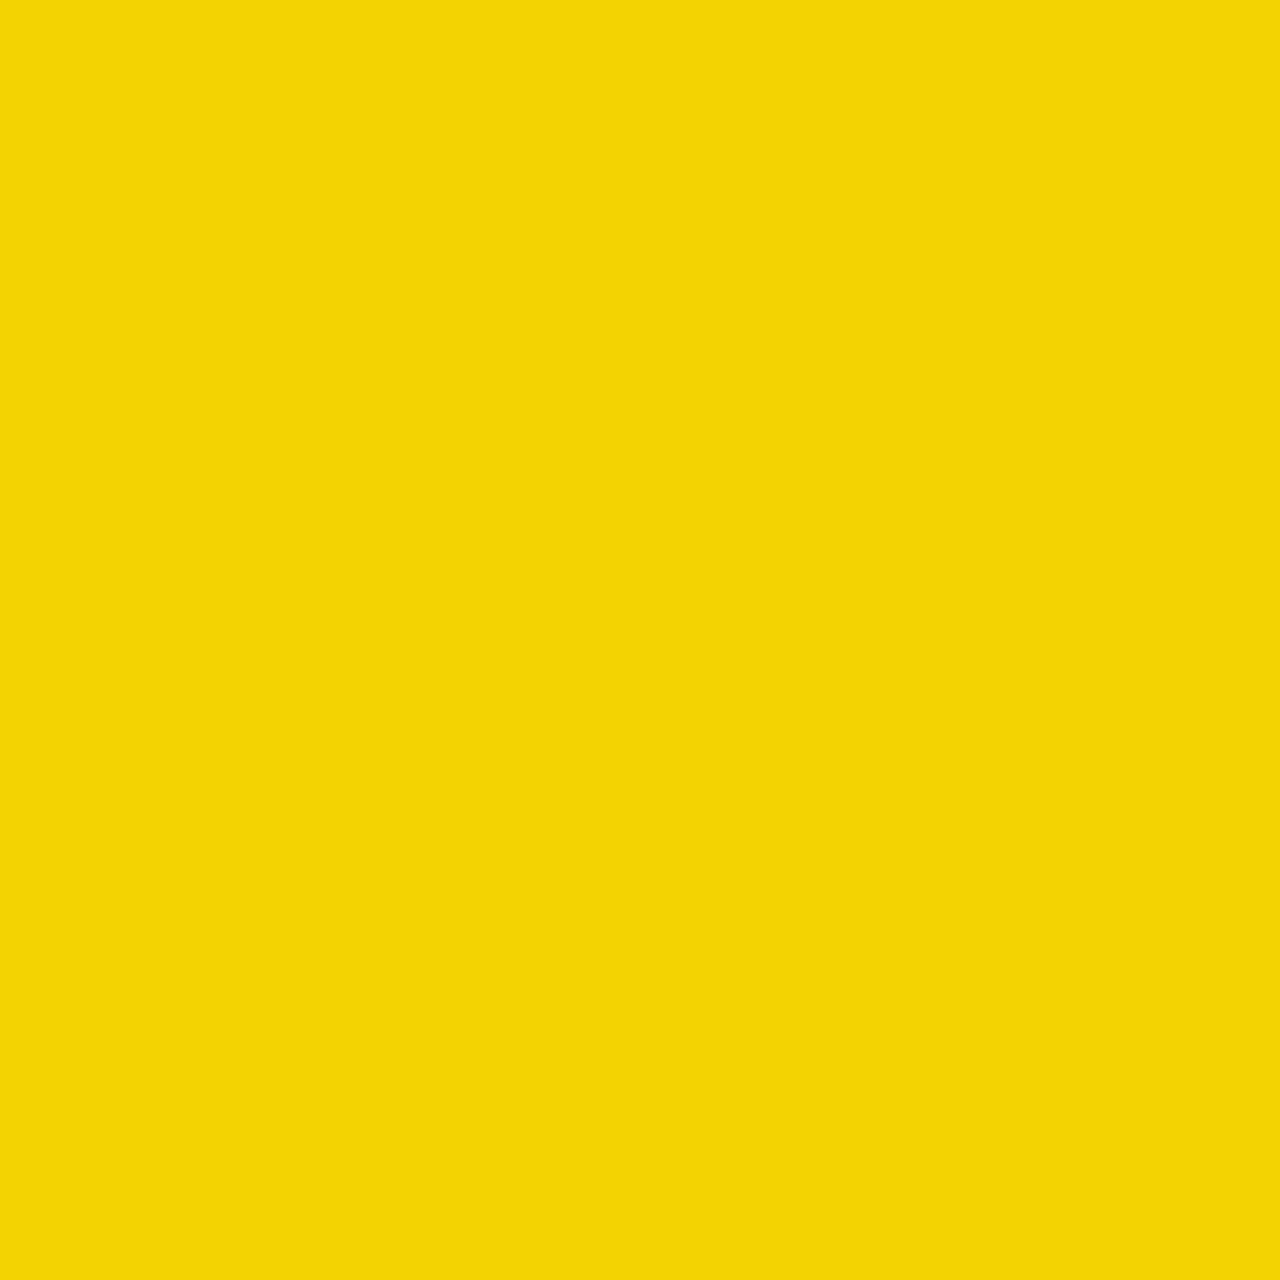 EasyWeed HTV: 12 x 15 - Pale Yellow